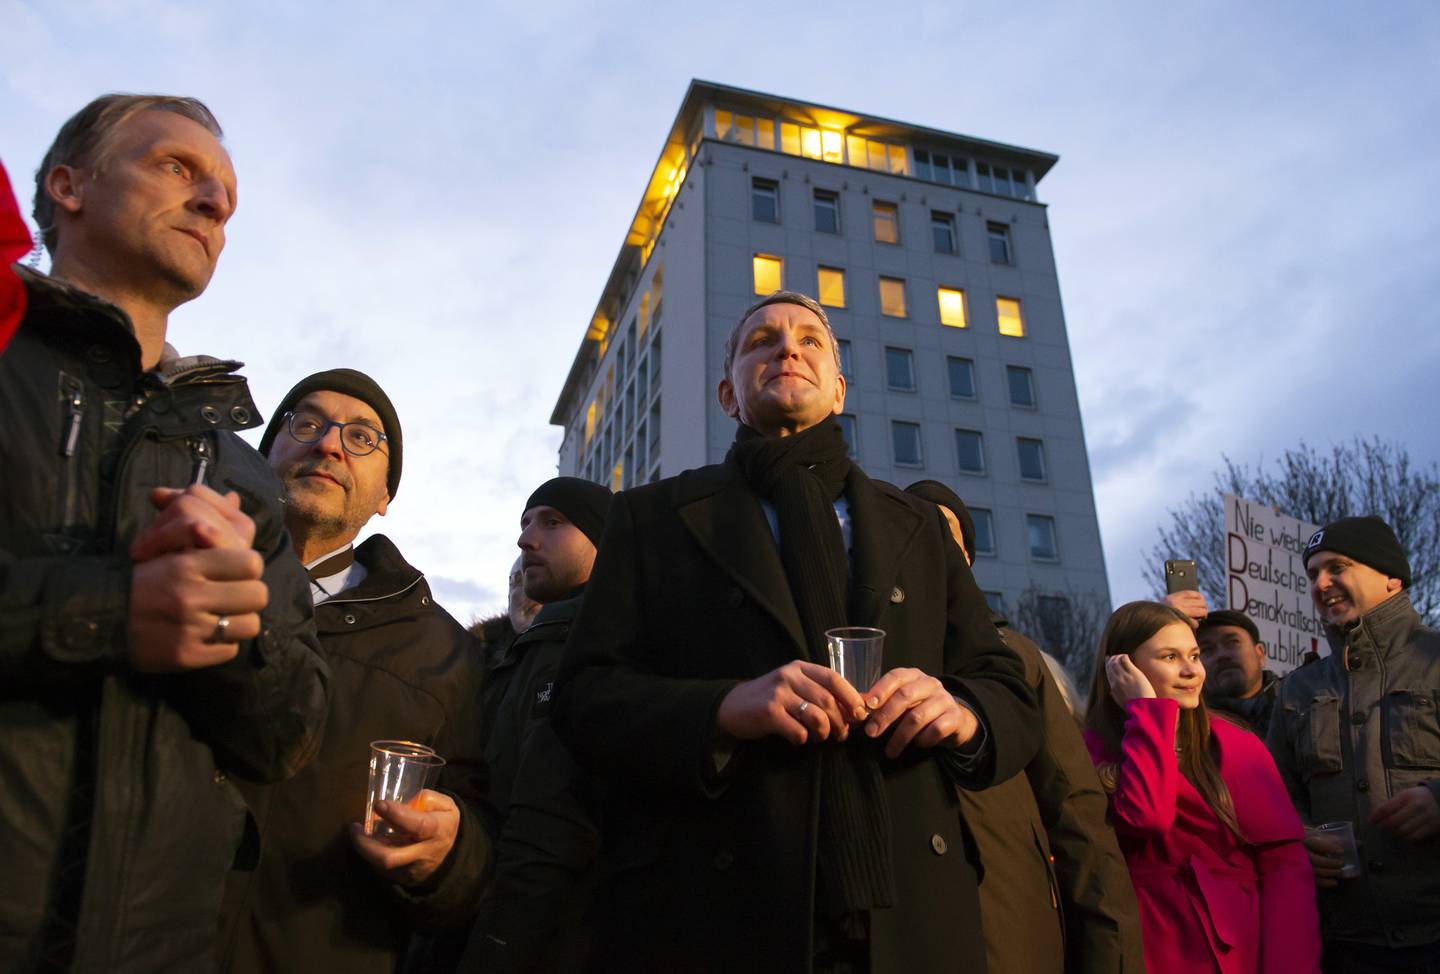 Bjoern Hoecke, chairman of the far-right Alternative fuer Deutschland (AfD) in Thuringia and candidate of the party for the state governor elections, 4th of left, attends a so called 'A light for democracy' silence demonstration, initiated by the far-right Alternative for Germany (AfD) party in Erfurt, central Germany, Tuesday, March 3, 2020. The parliament of the eastern German state Thuringia will elect a new governor on Wednesday, March 4, 2020. (AP Photo/Jens Meyer)